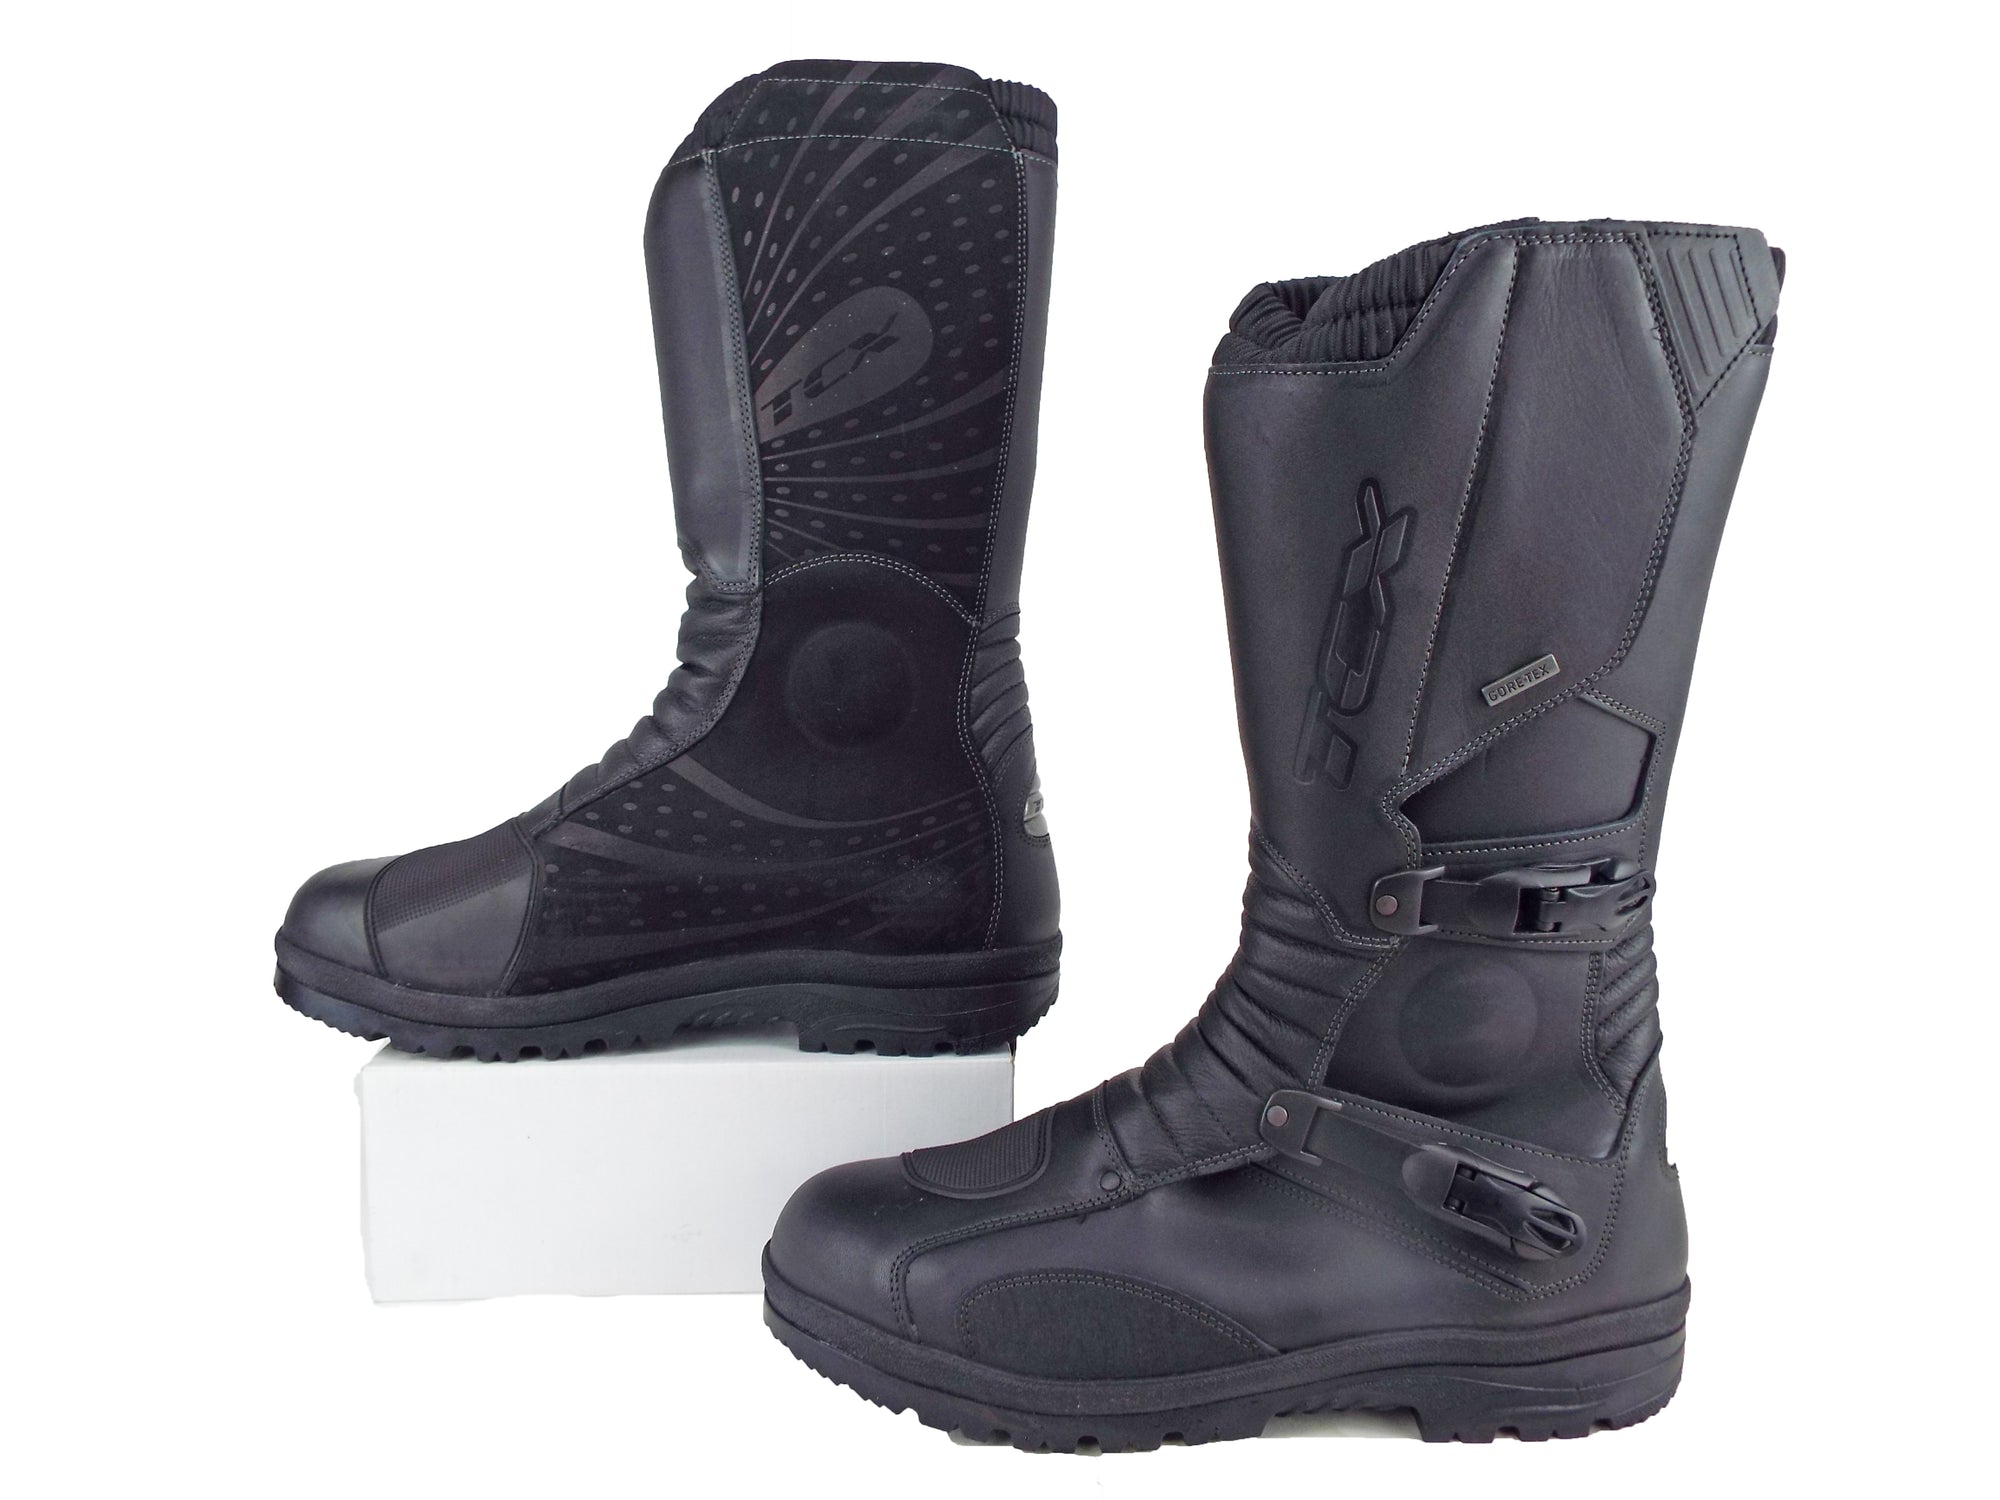 Italian Motorcycle Boots - Dutch Police Issue - TCX - Unissued